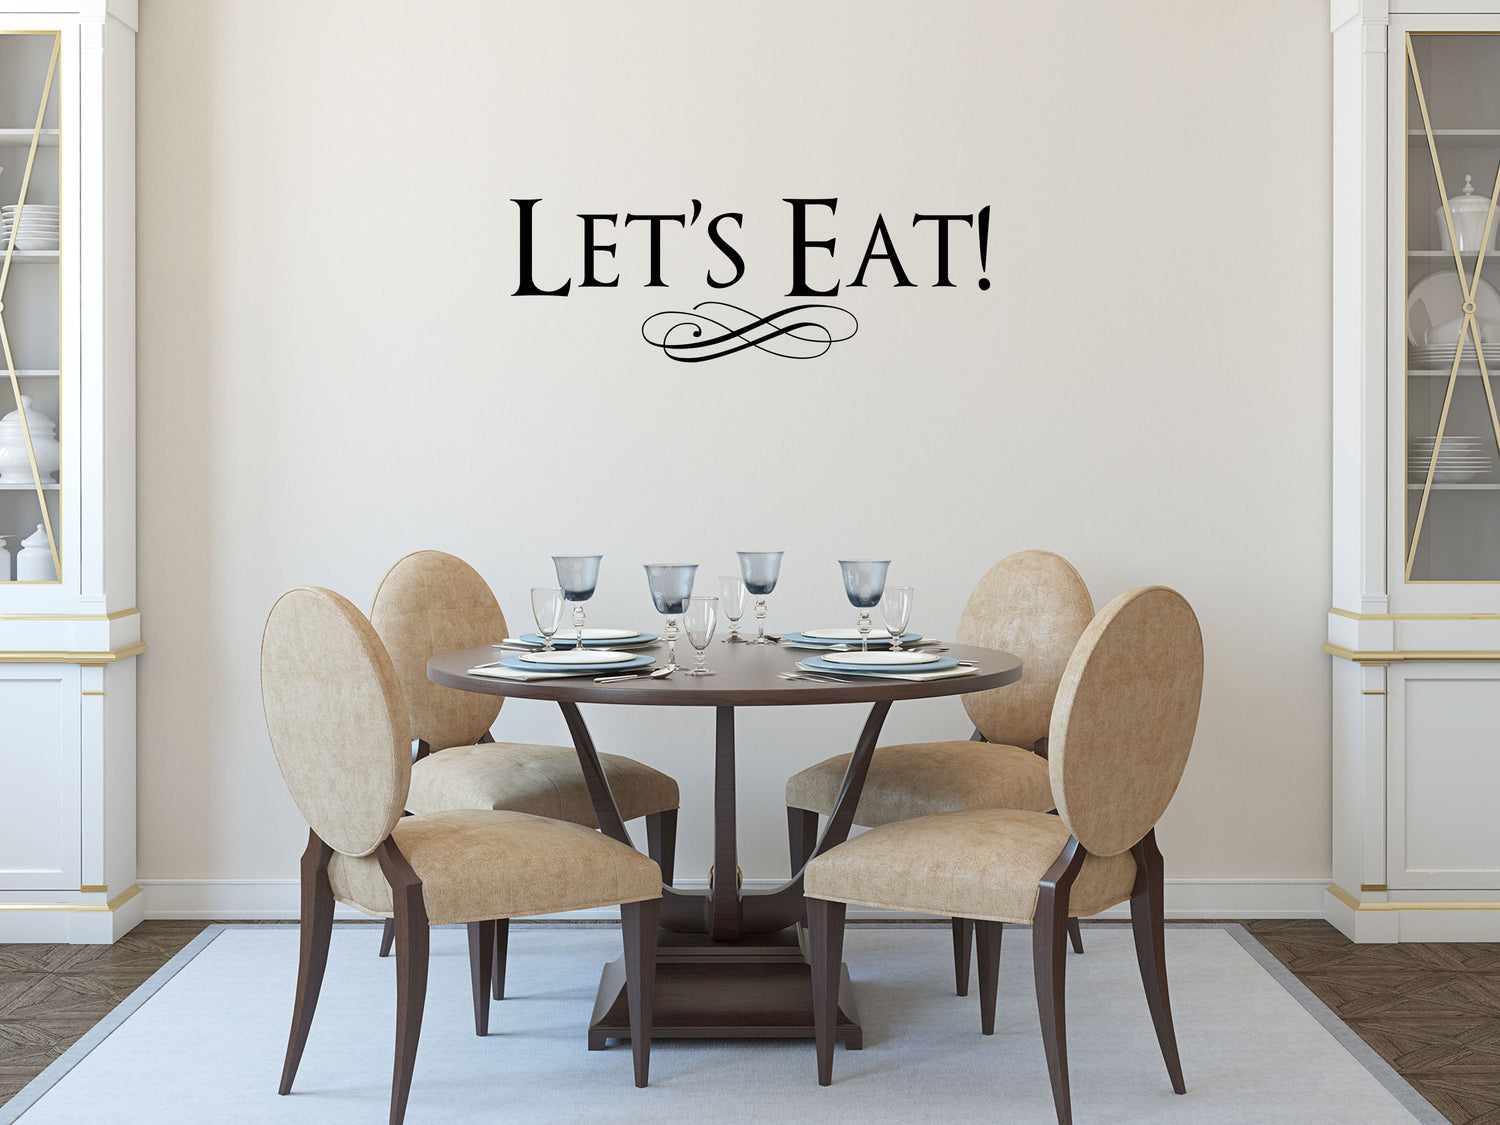 Let's Eat Dining Room Wall Decal - Kitchen Removeable Wall Vinyl Quote